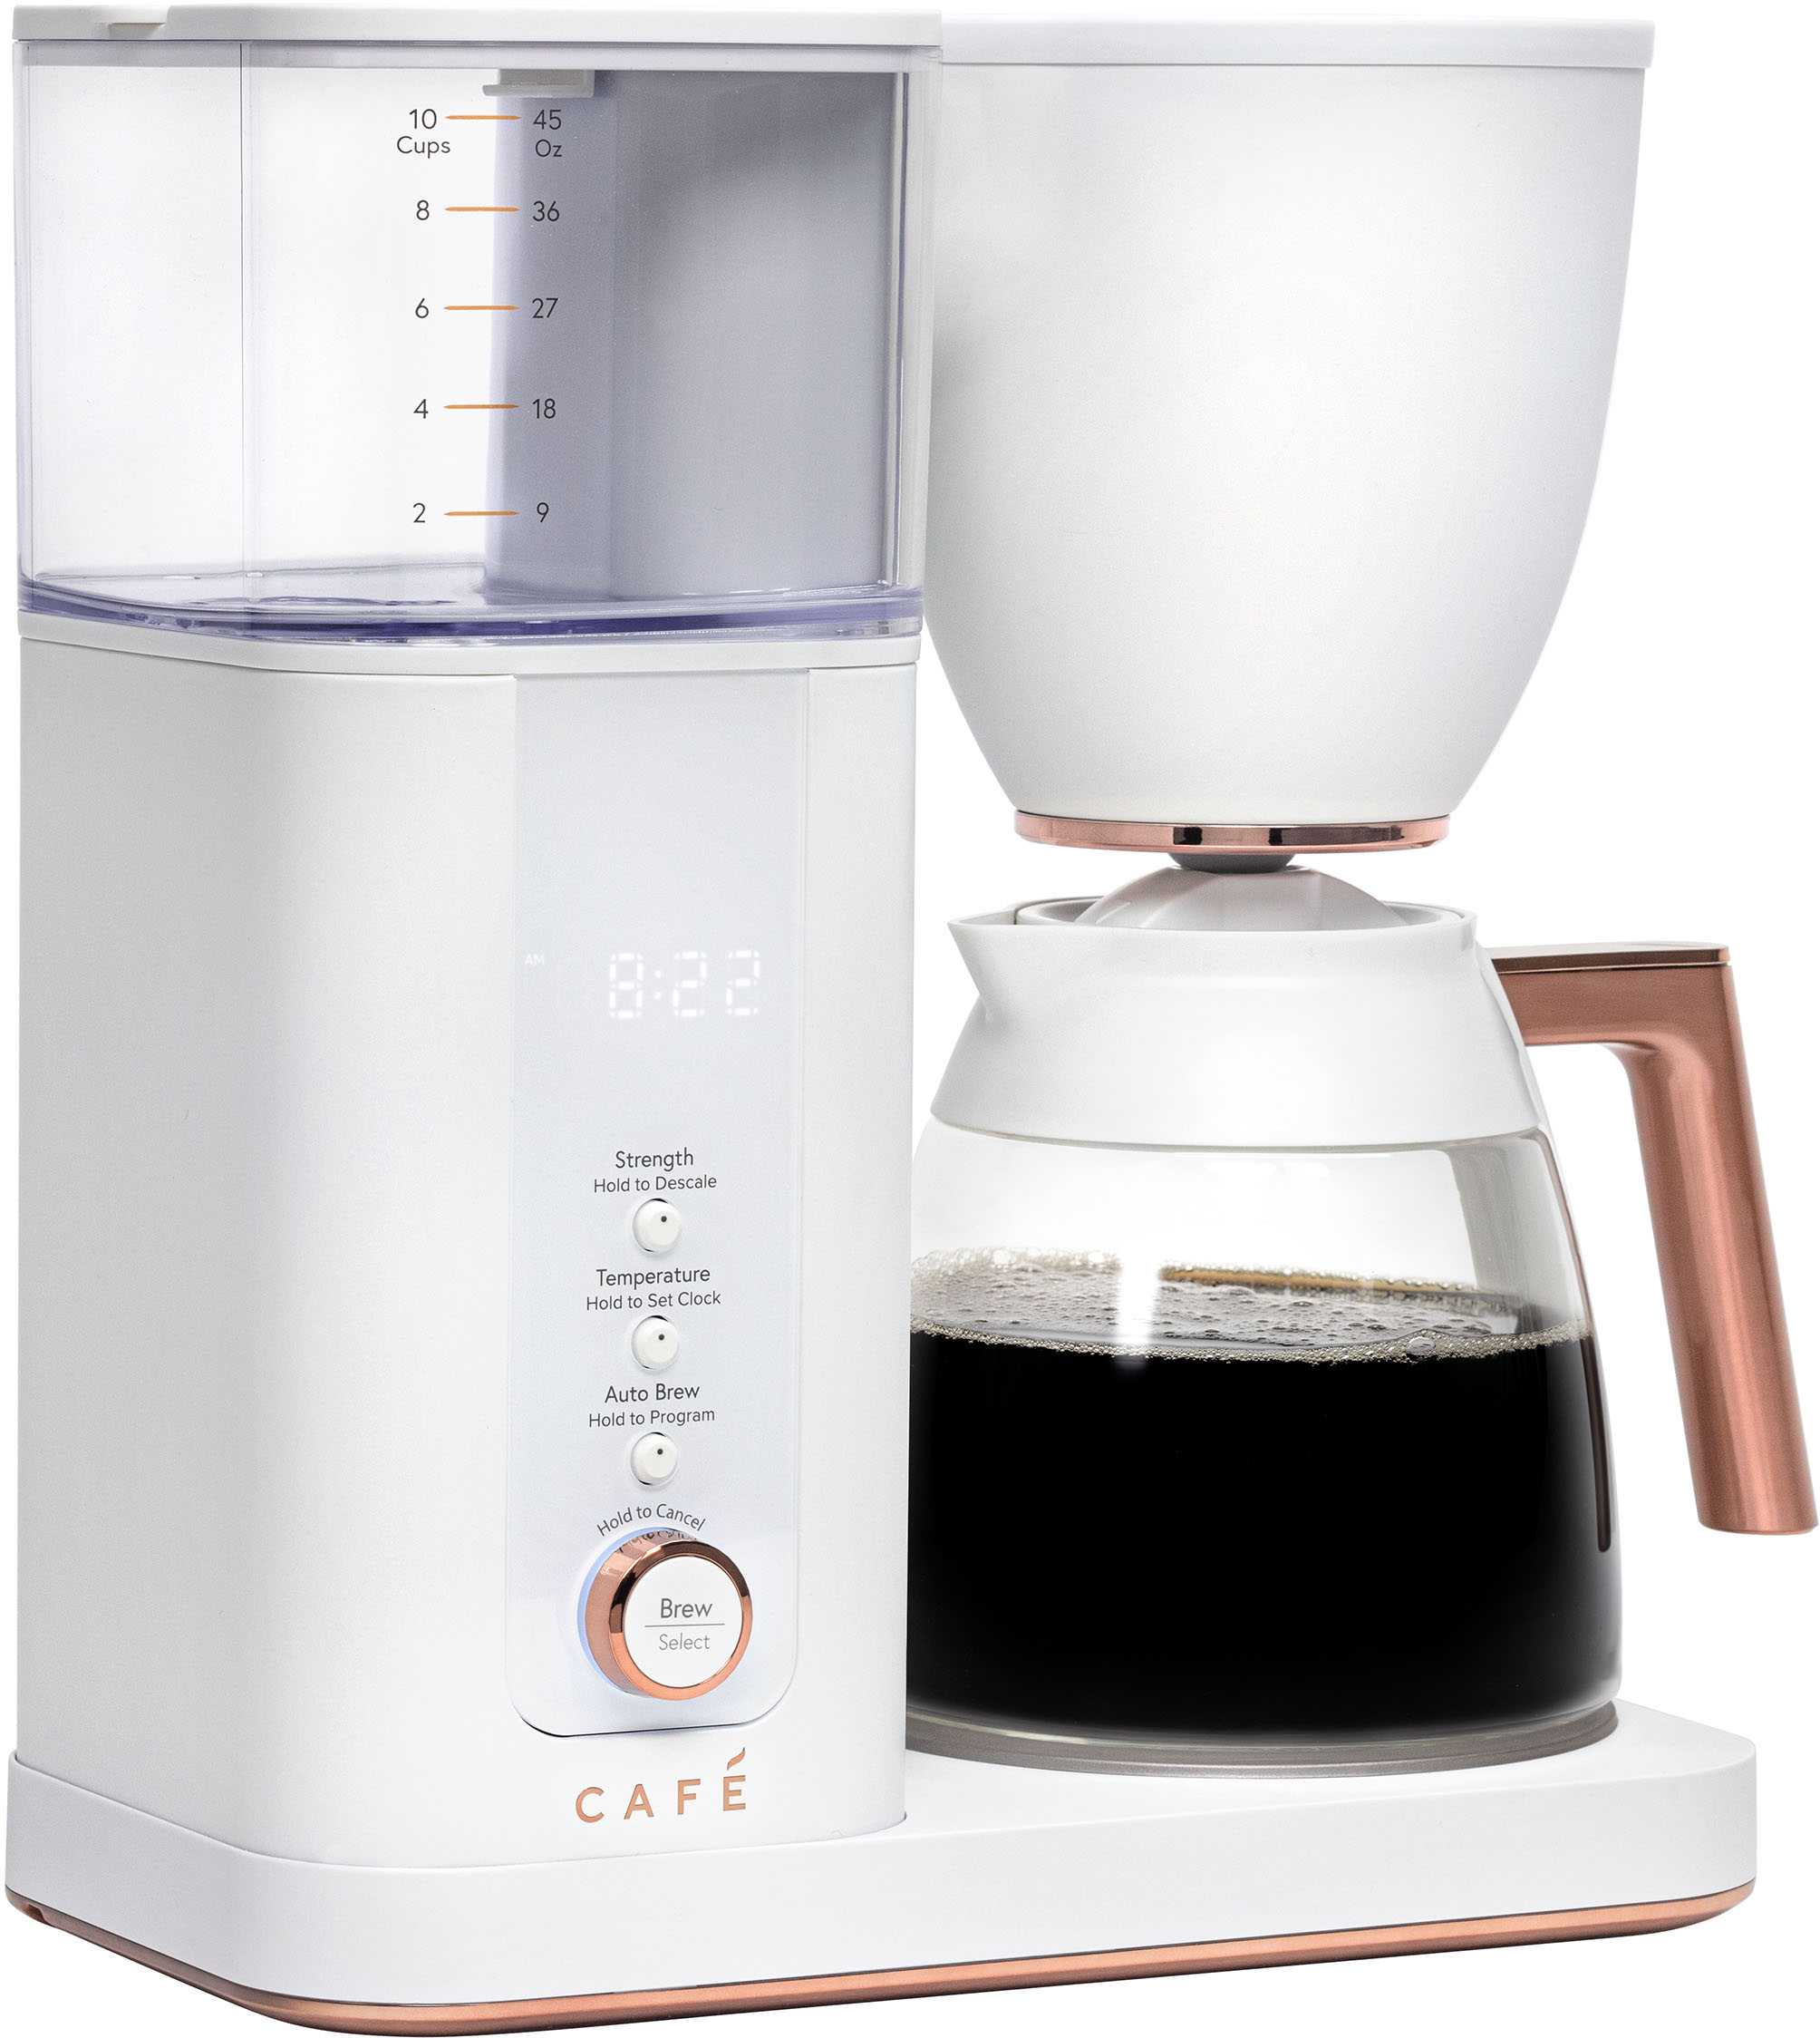 Braun MultiServe 10-Cup SCA White Coffee Maker w/Water Spout